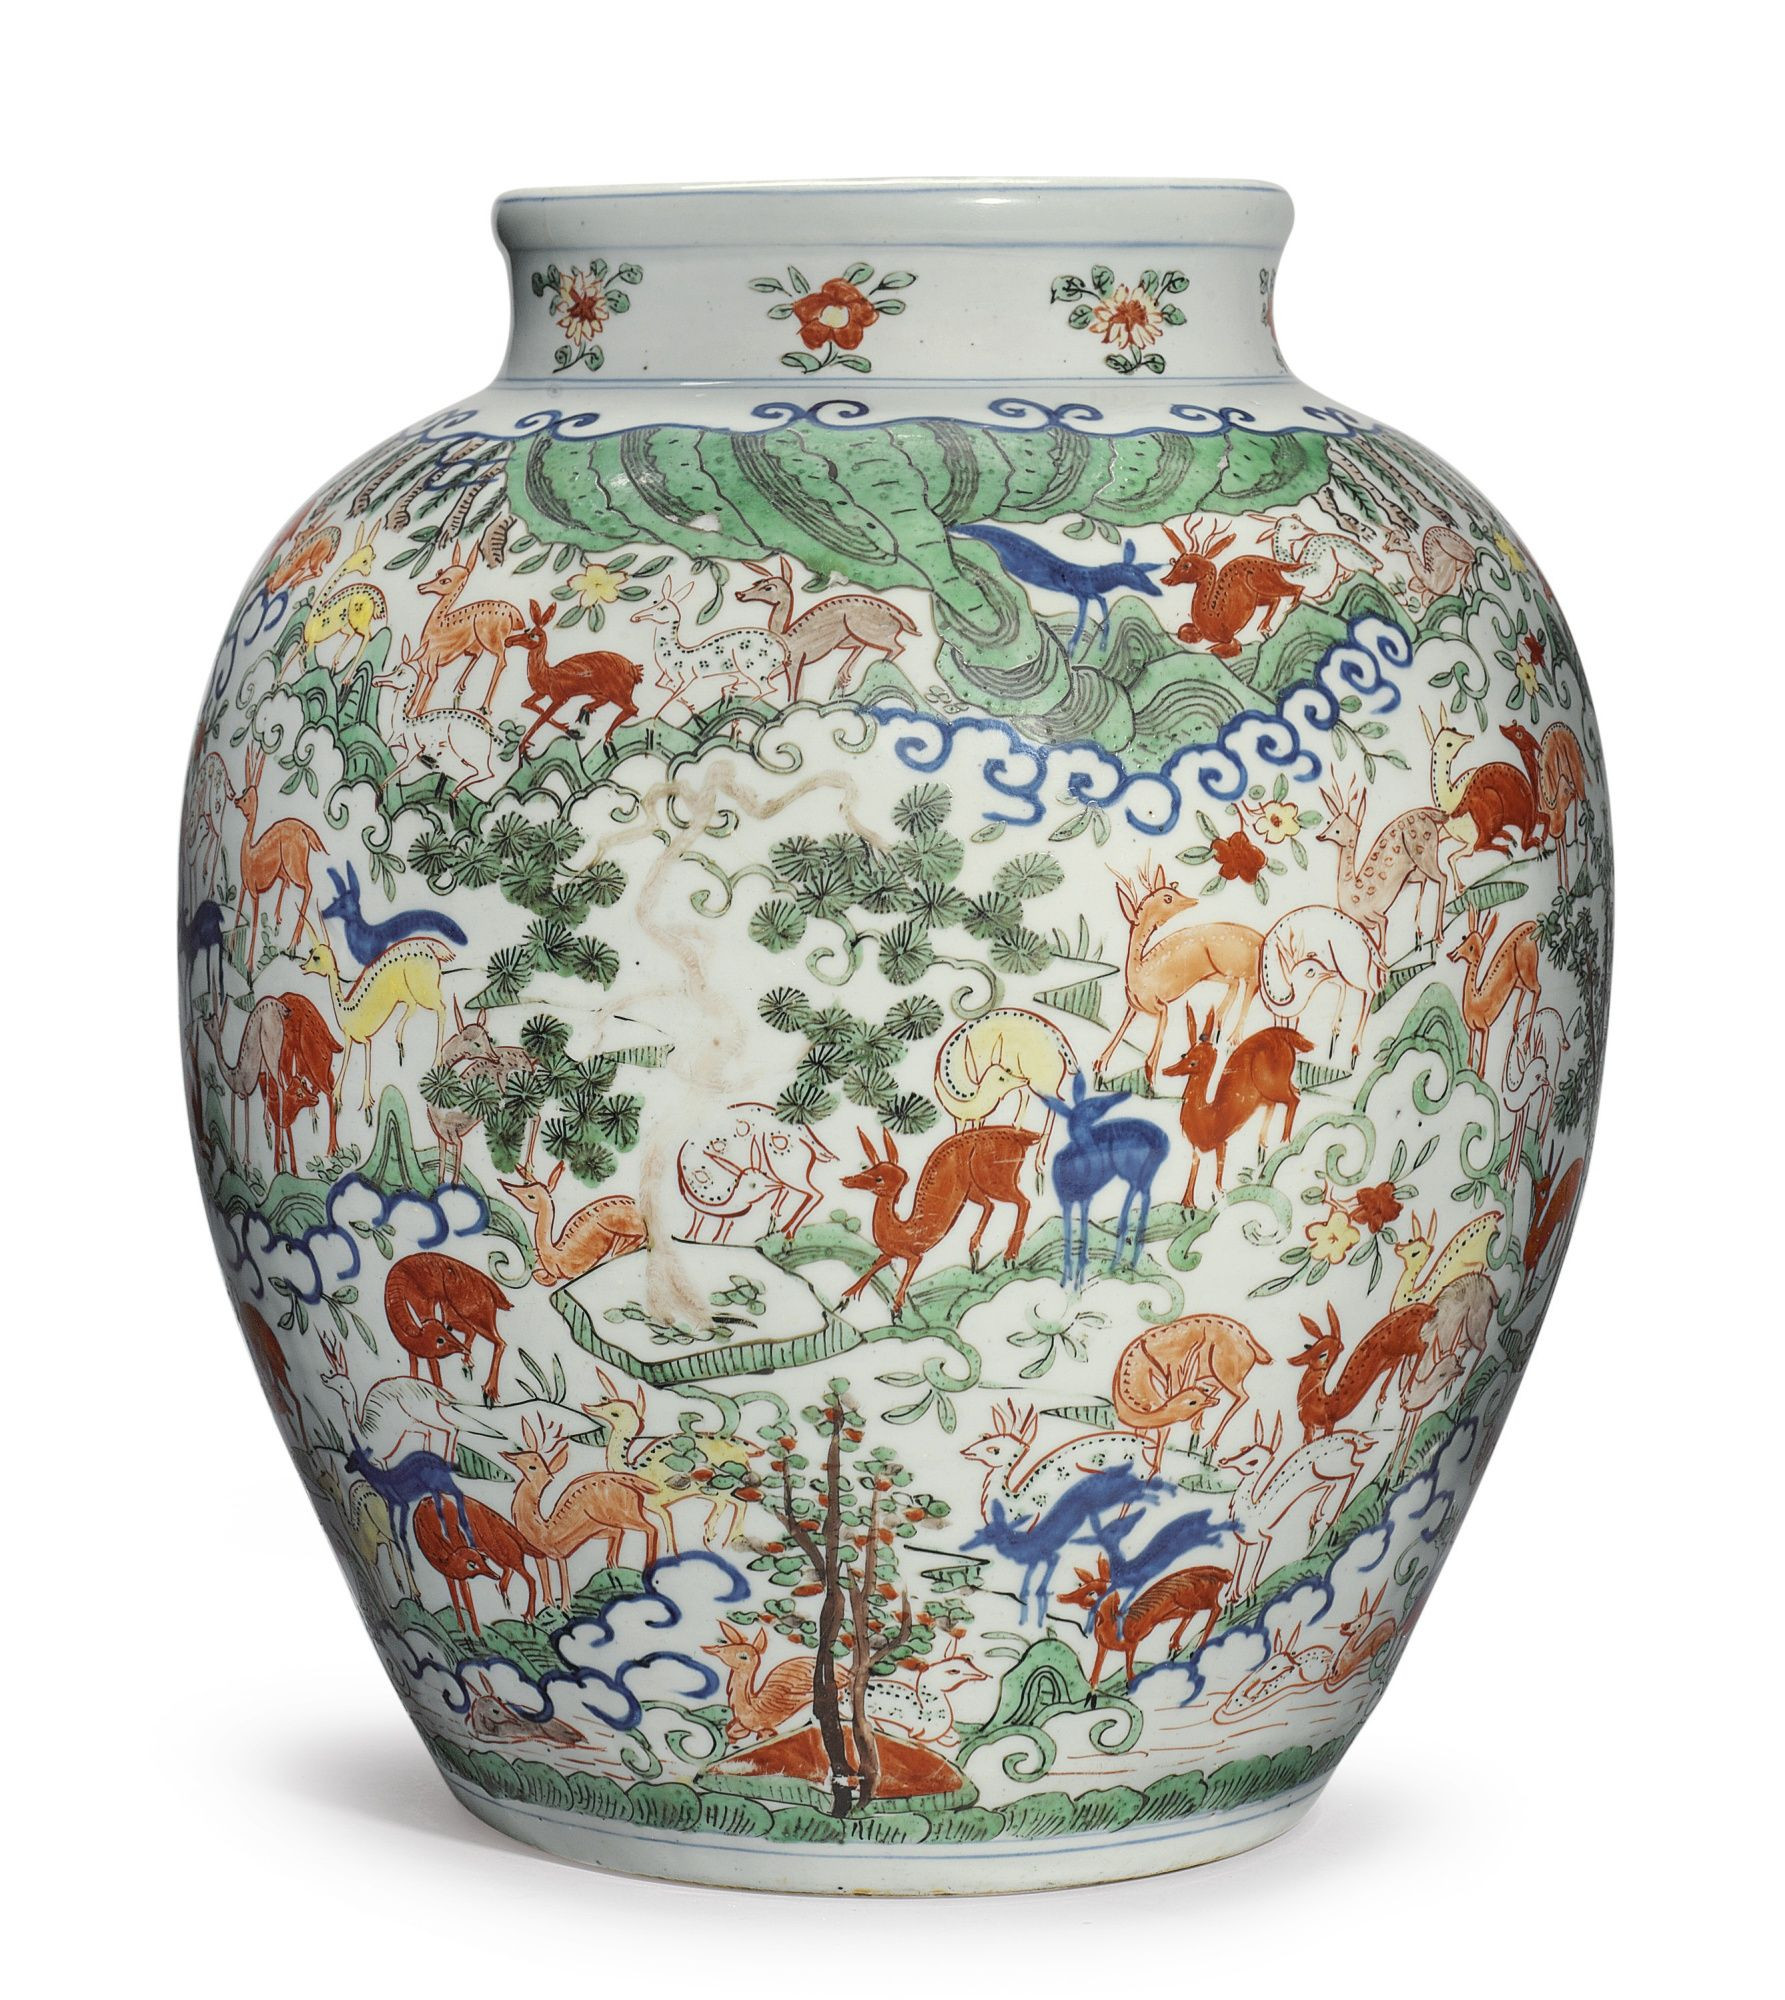 28 Fashionable Large Chinese Vase 2022 free download large chinese vase of a large and important wucai hundred deer vase wanli mark and within a large and important wucai hundred deer vase wanli mark and period 1573 1619